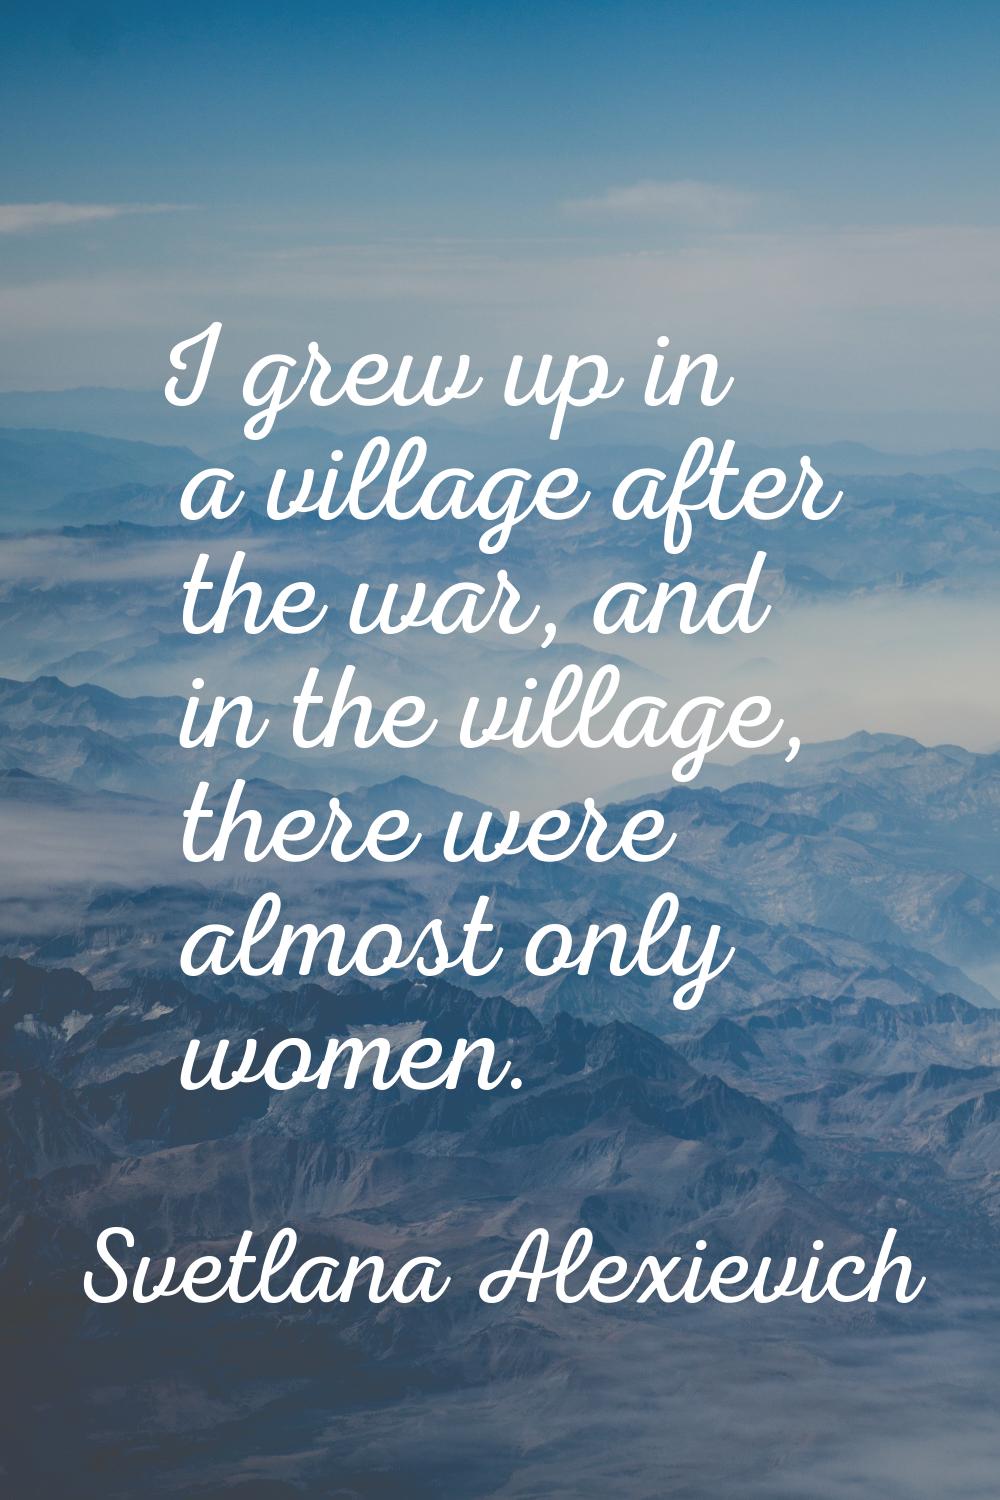 I grew up in a village after the war, and in the village, there were almost only women.